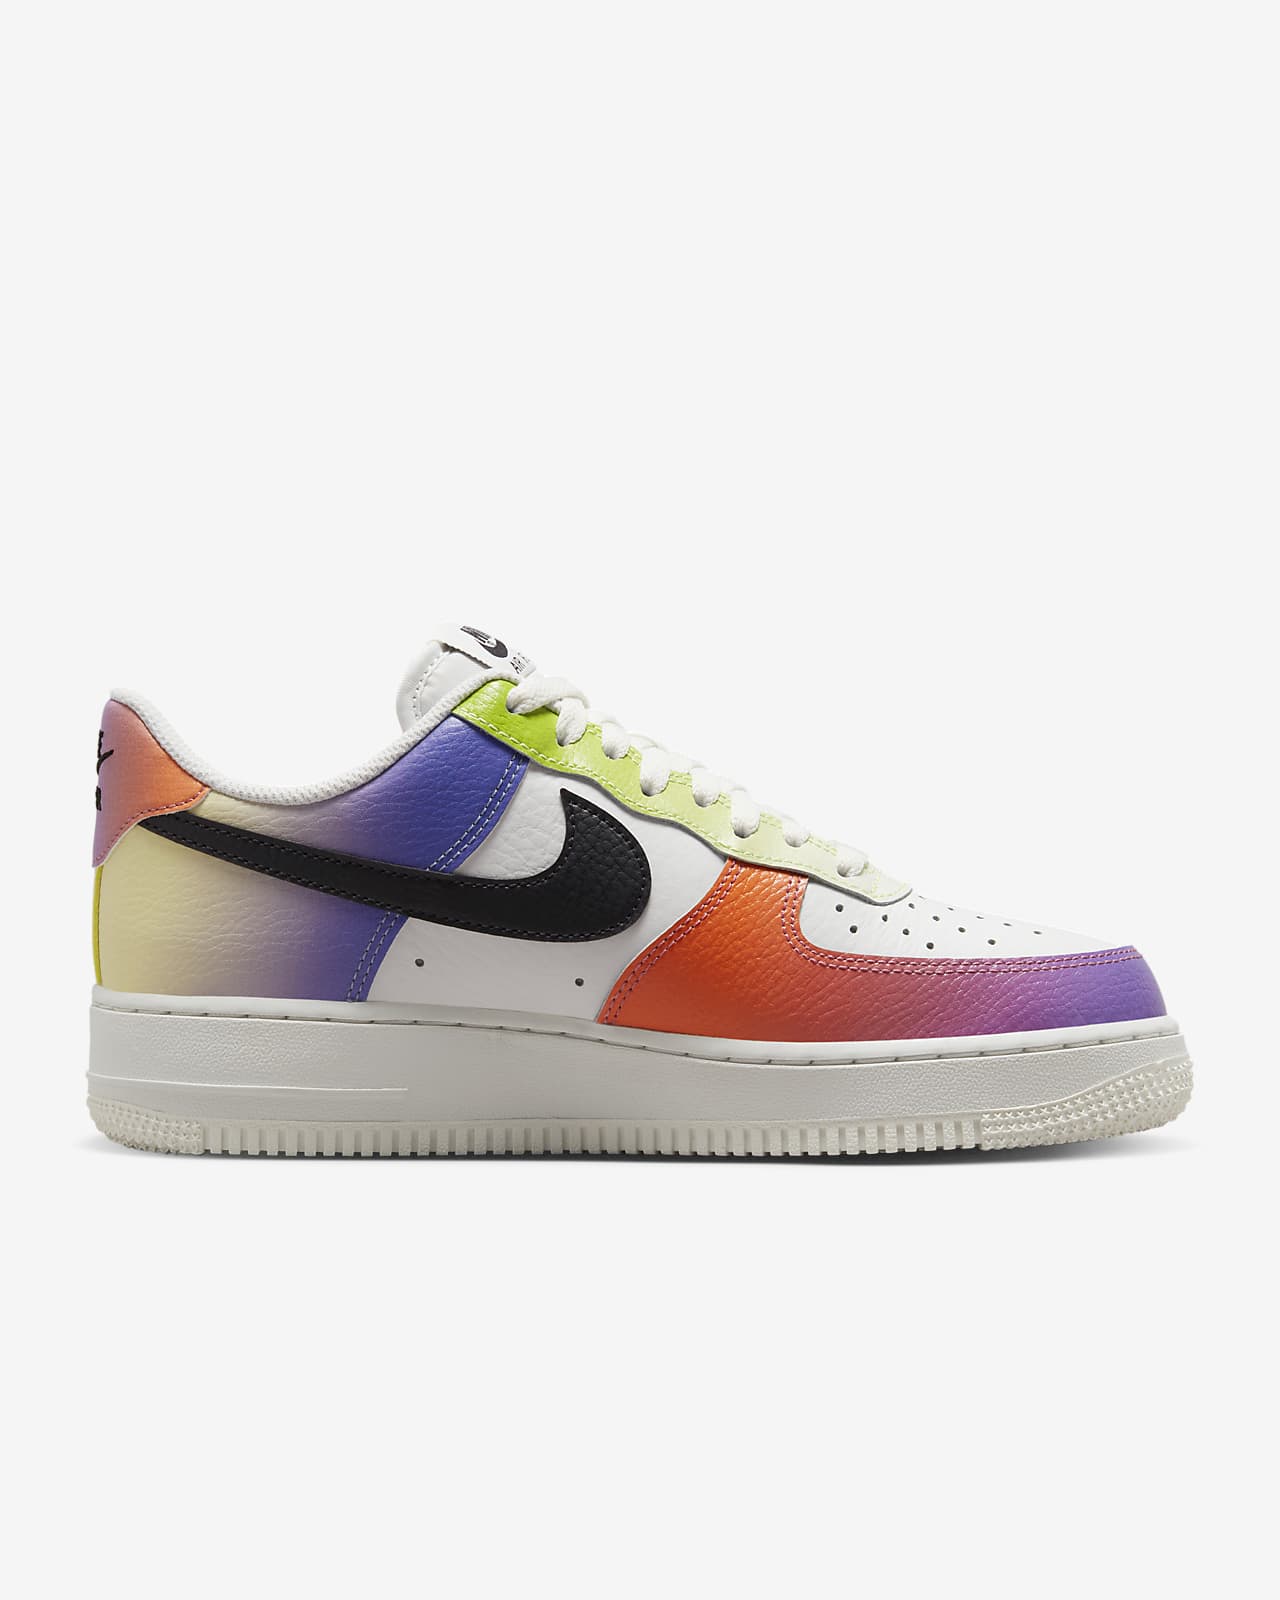 Nike Air Force 1 '07 Women's Shoes - White